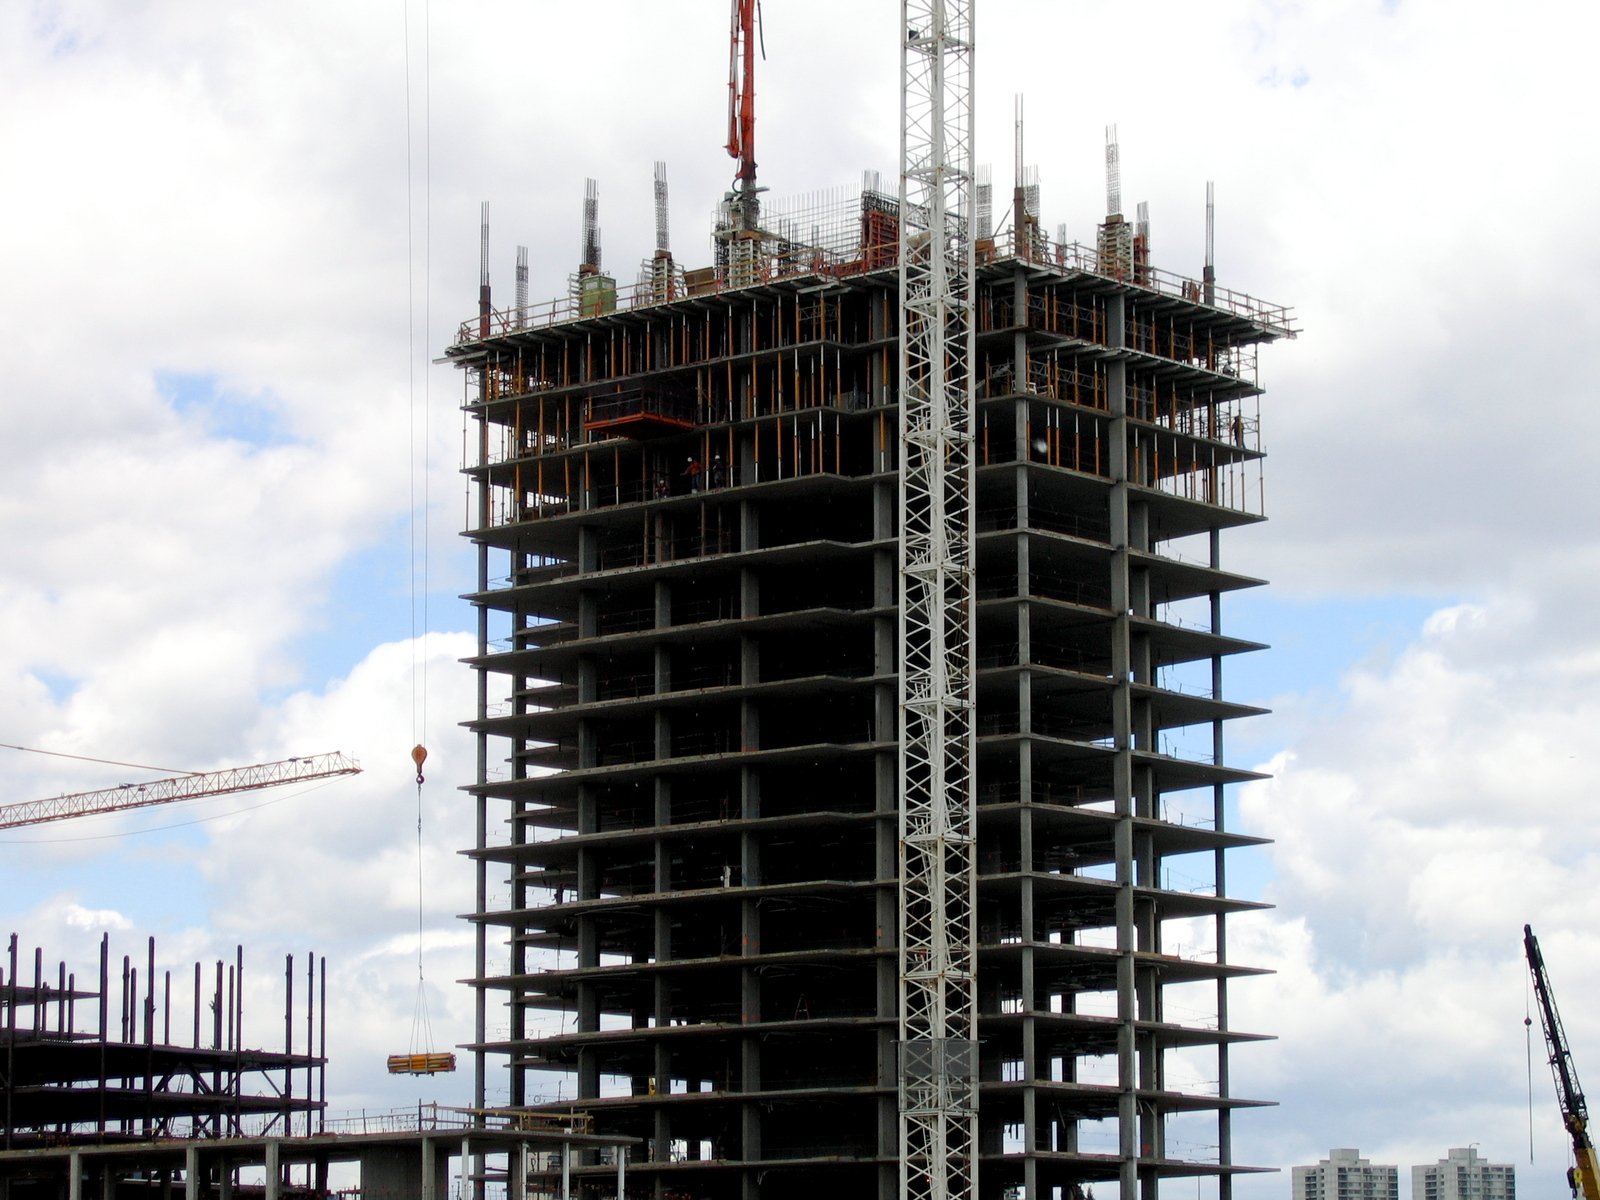 a large tower under construction with lots of cranes